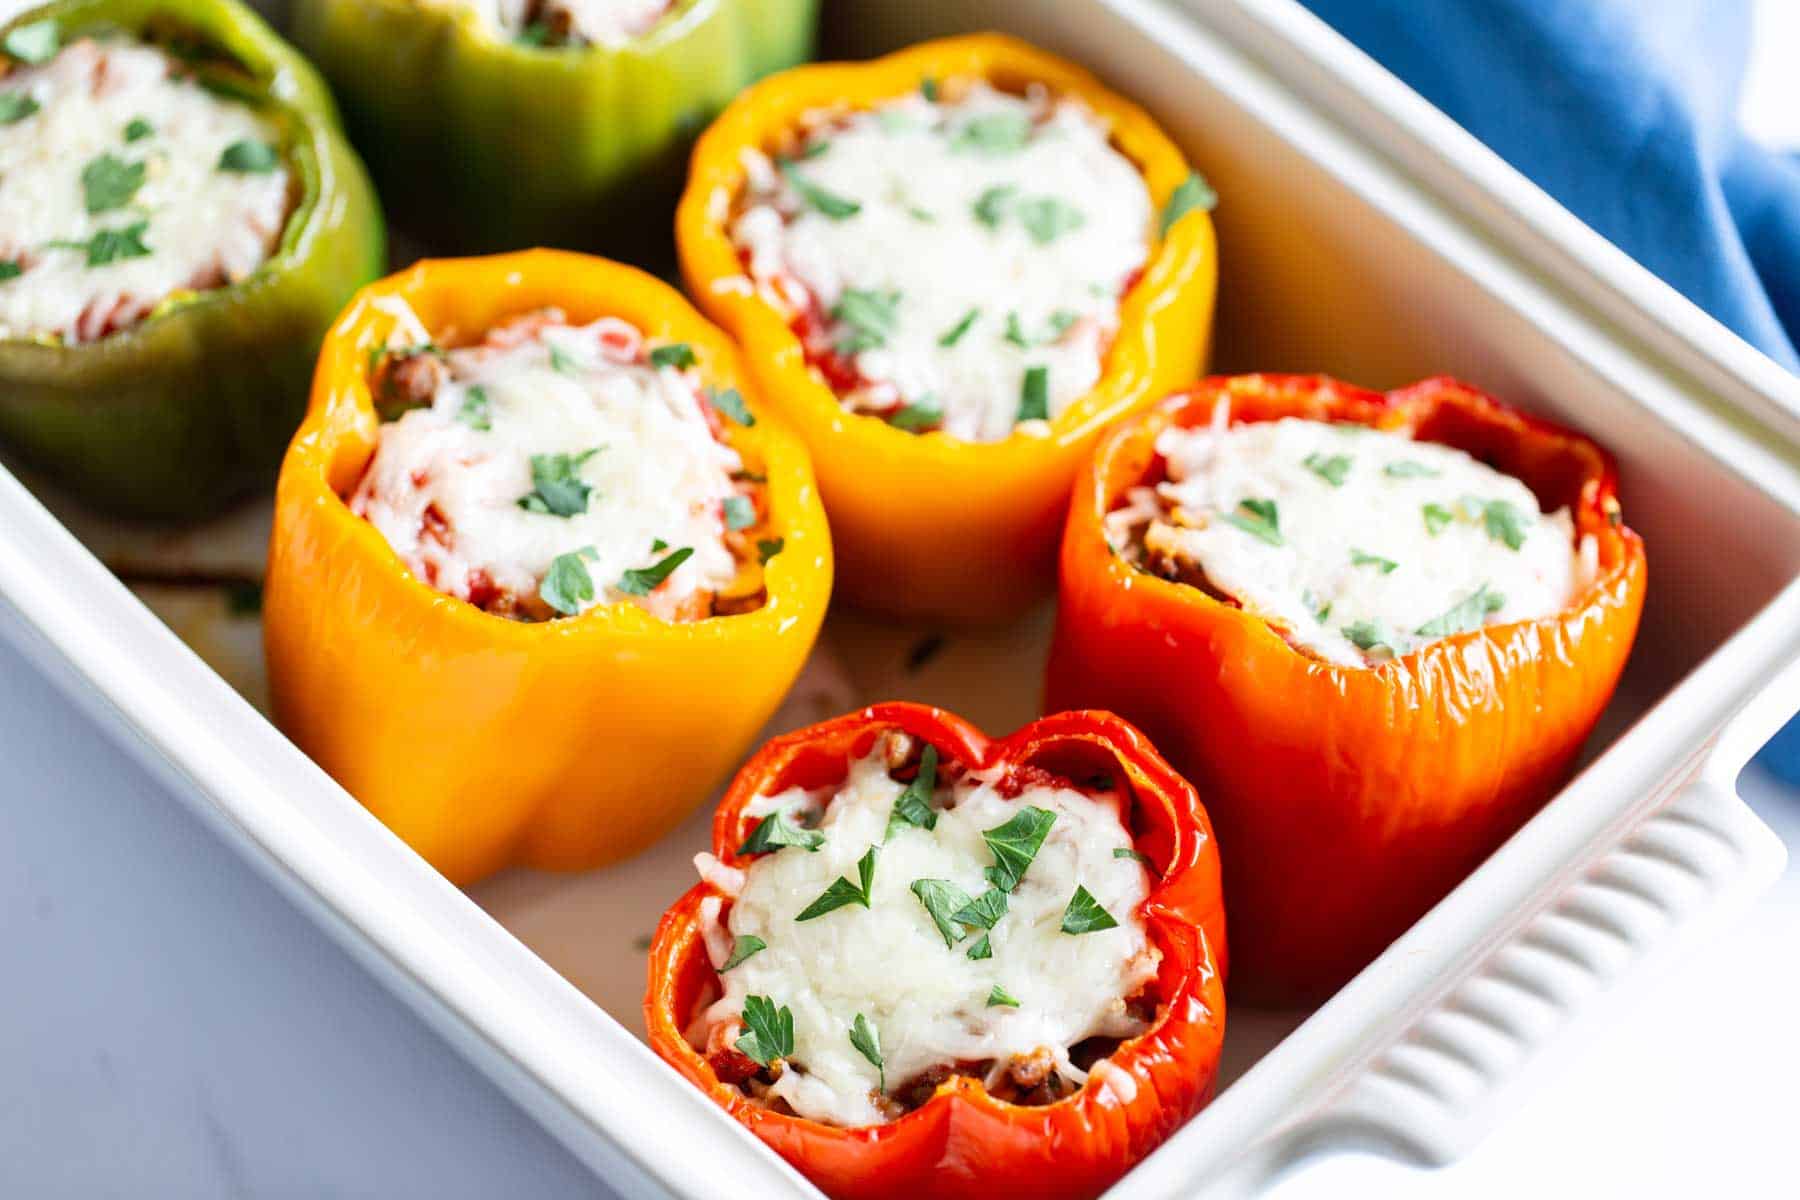 Stuffed bell peppers in red, yellow, and green, filled with rice and meat, topped with melted cheese and parsley, in a baking dish.